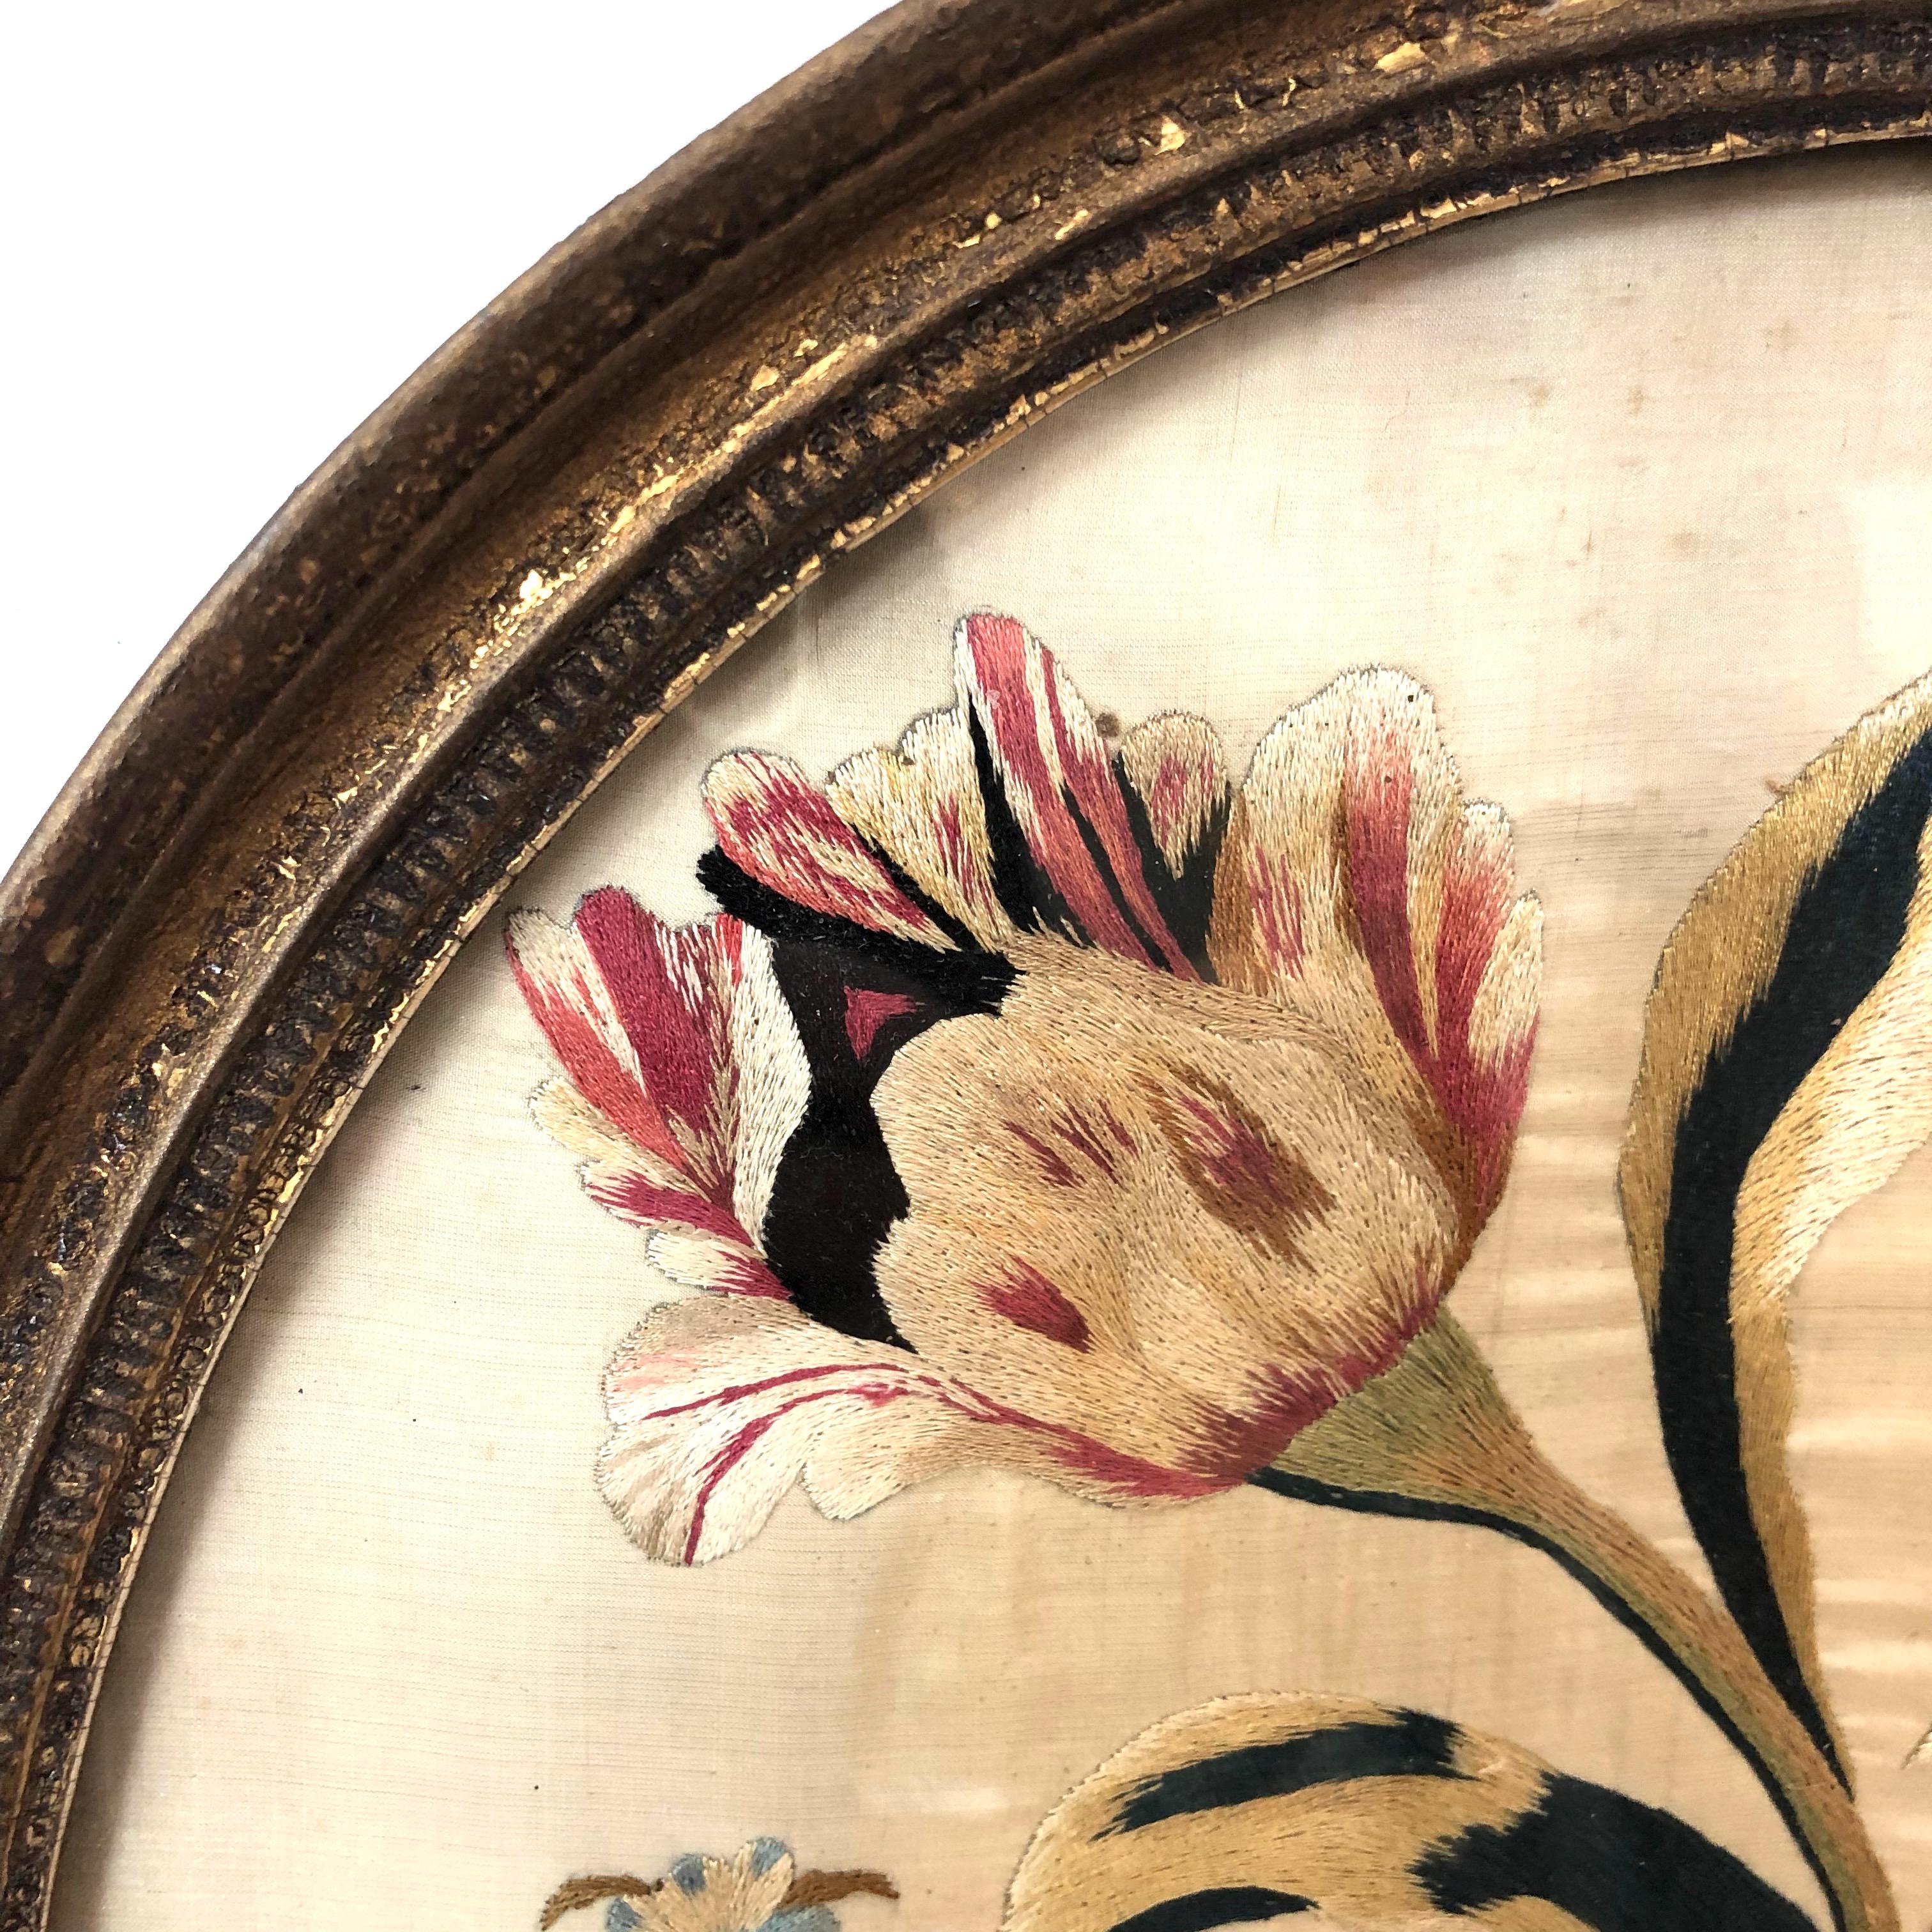 First quarter of the 19th century oval floral embroidery in original framing.